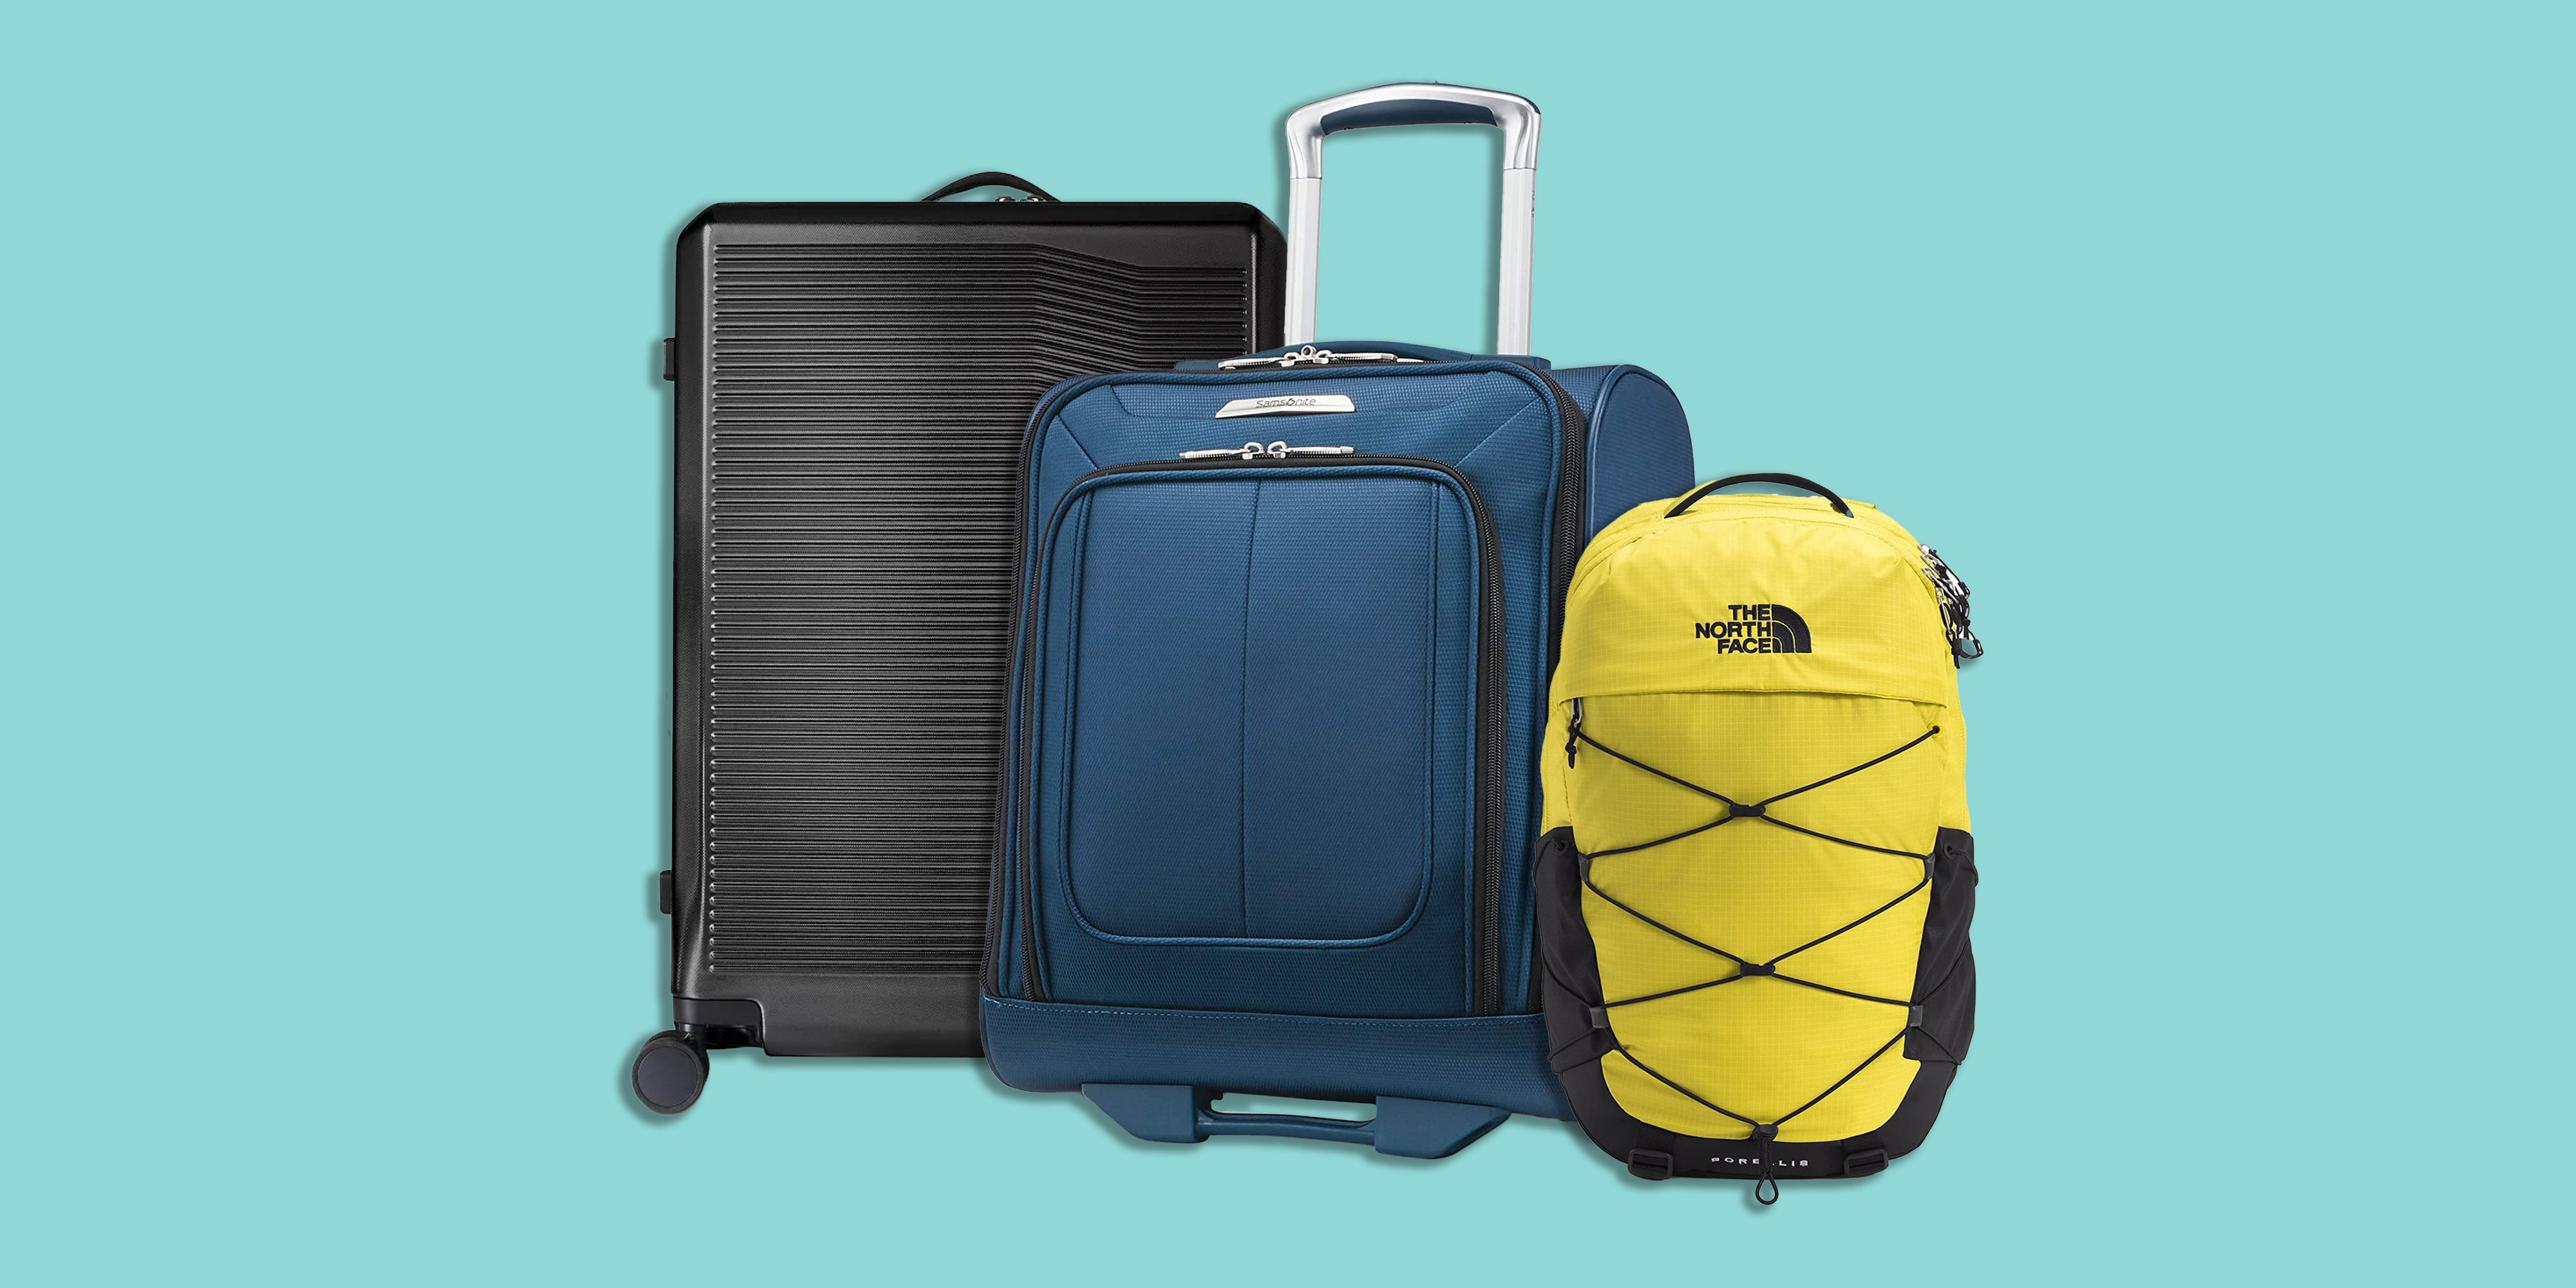 This Large Suitcase Is Lightweight and Durable